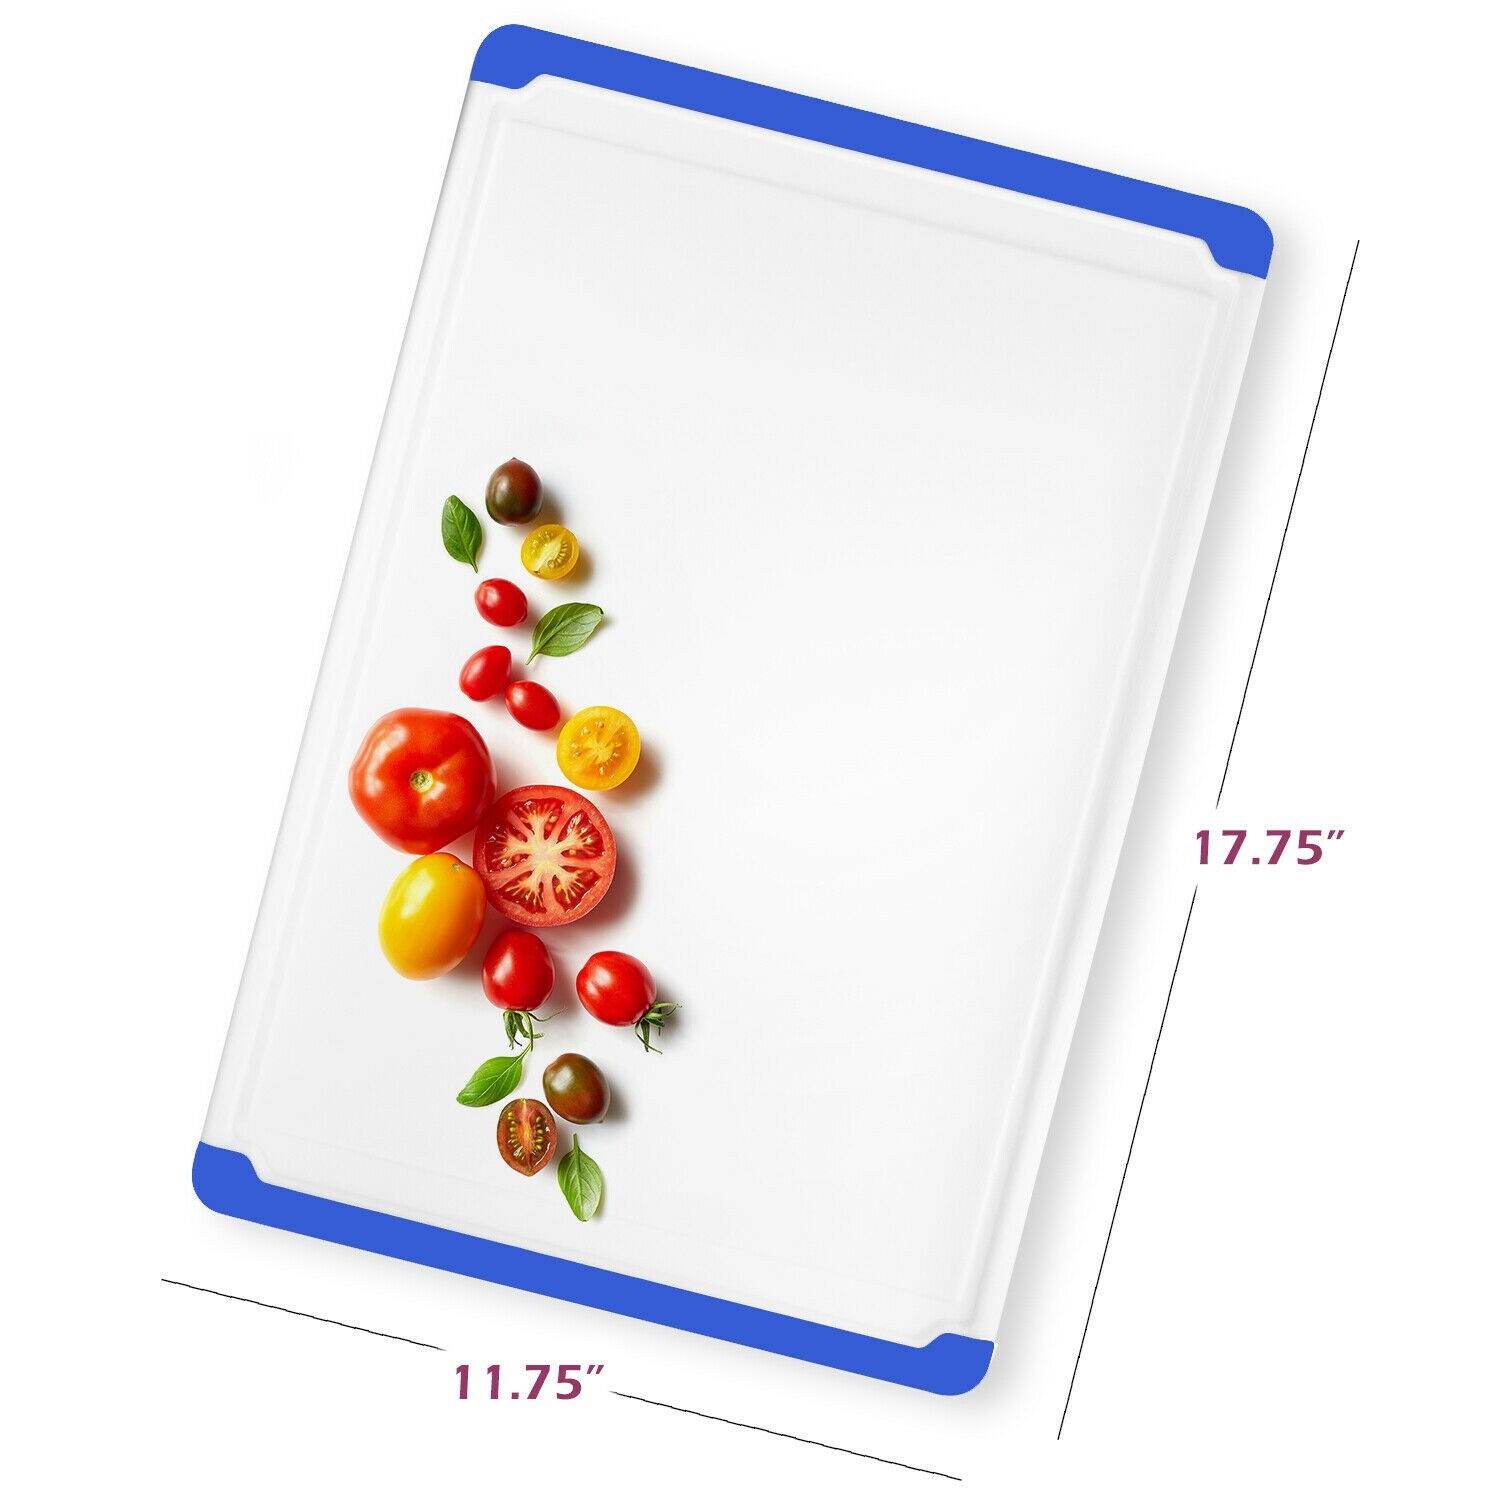 https://ak1.ostkcdn.com/images/products/is/images/direct/bee16dd3f19b769fc61cdfd189f2769639bc2727/Belwares-Large-Plastic-Cutting-Board-With-Drip-Grooves.jpg